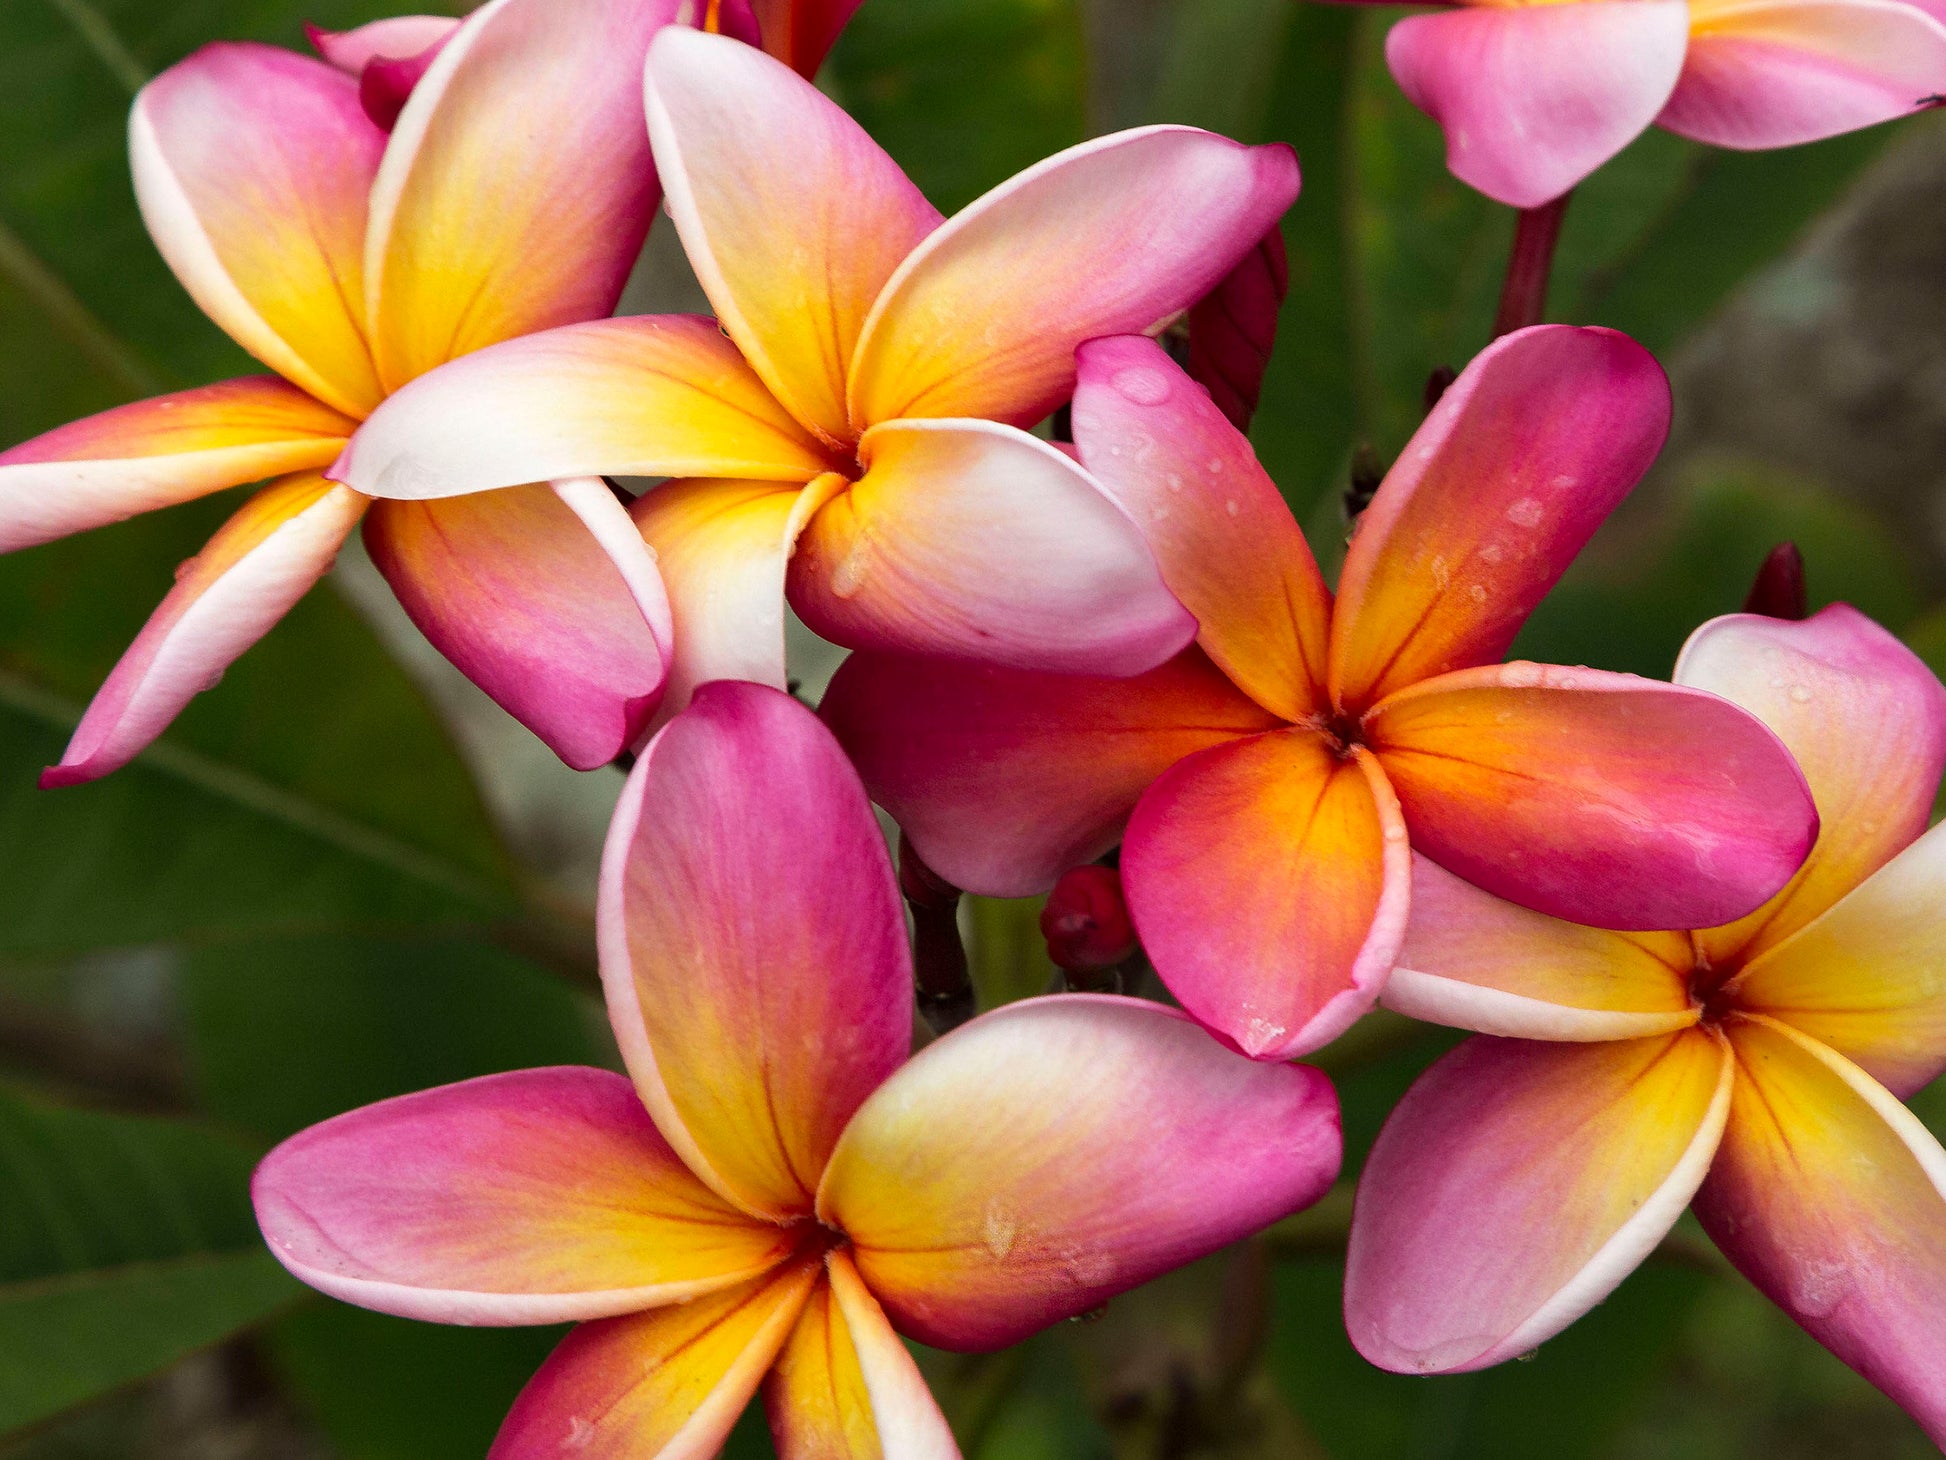 Fine art photograph of pink and gold plumeria flowers. Photograph by Kauai nature photographers Inspiring Images Hawaii.